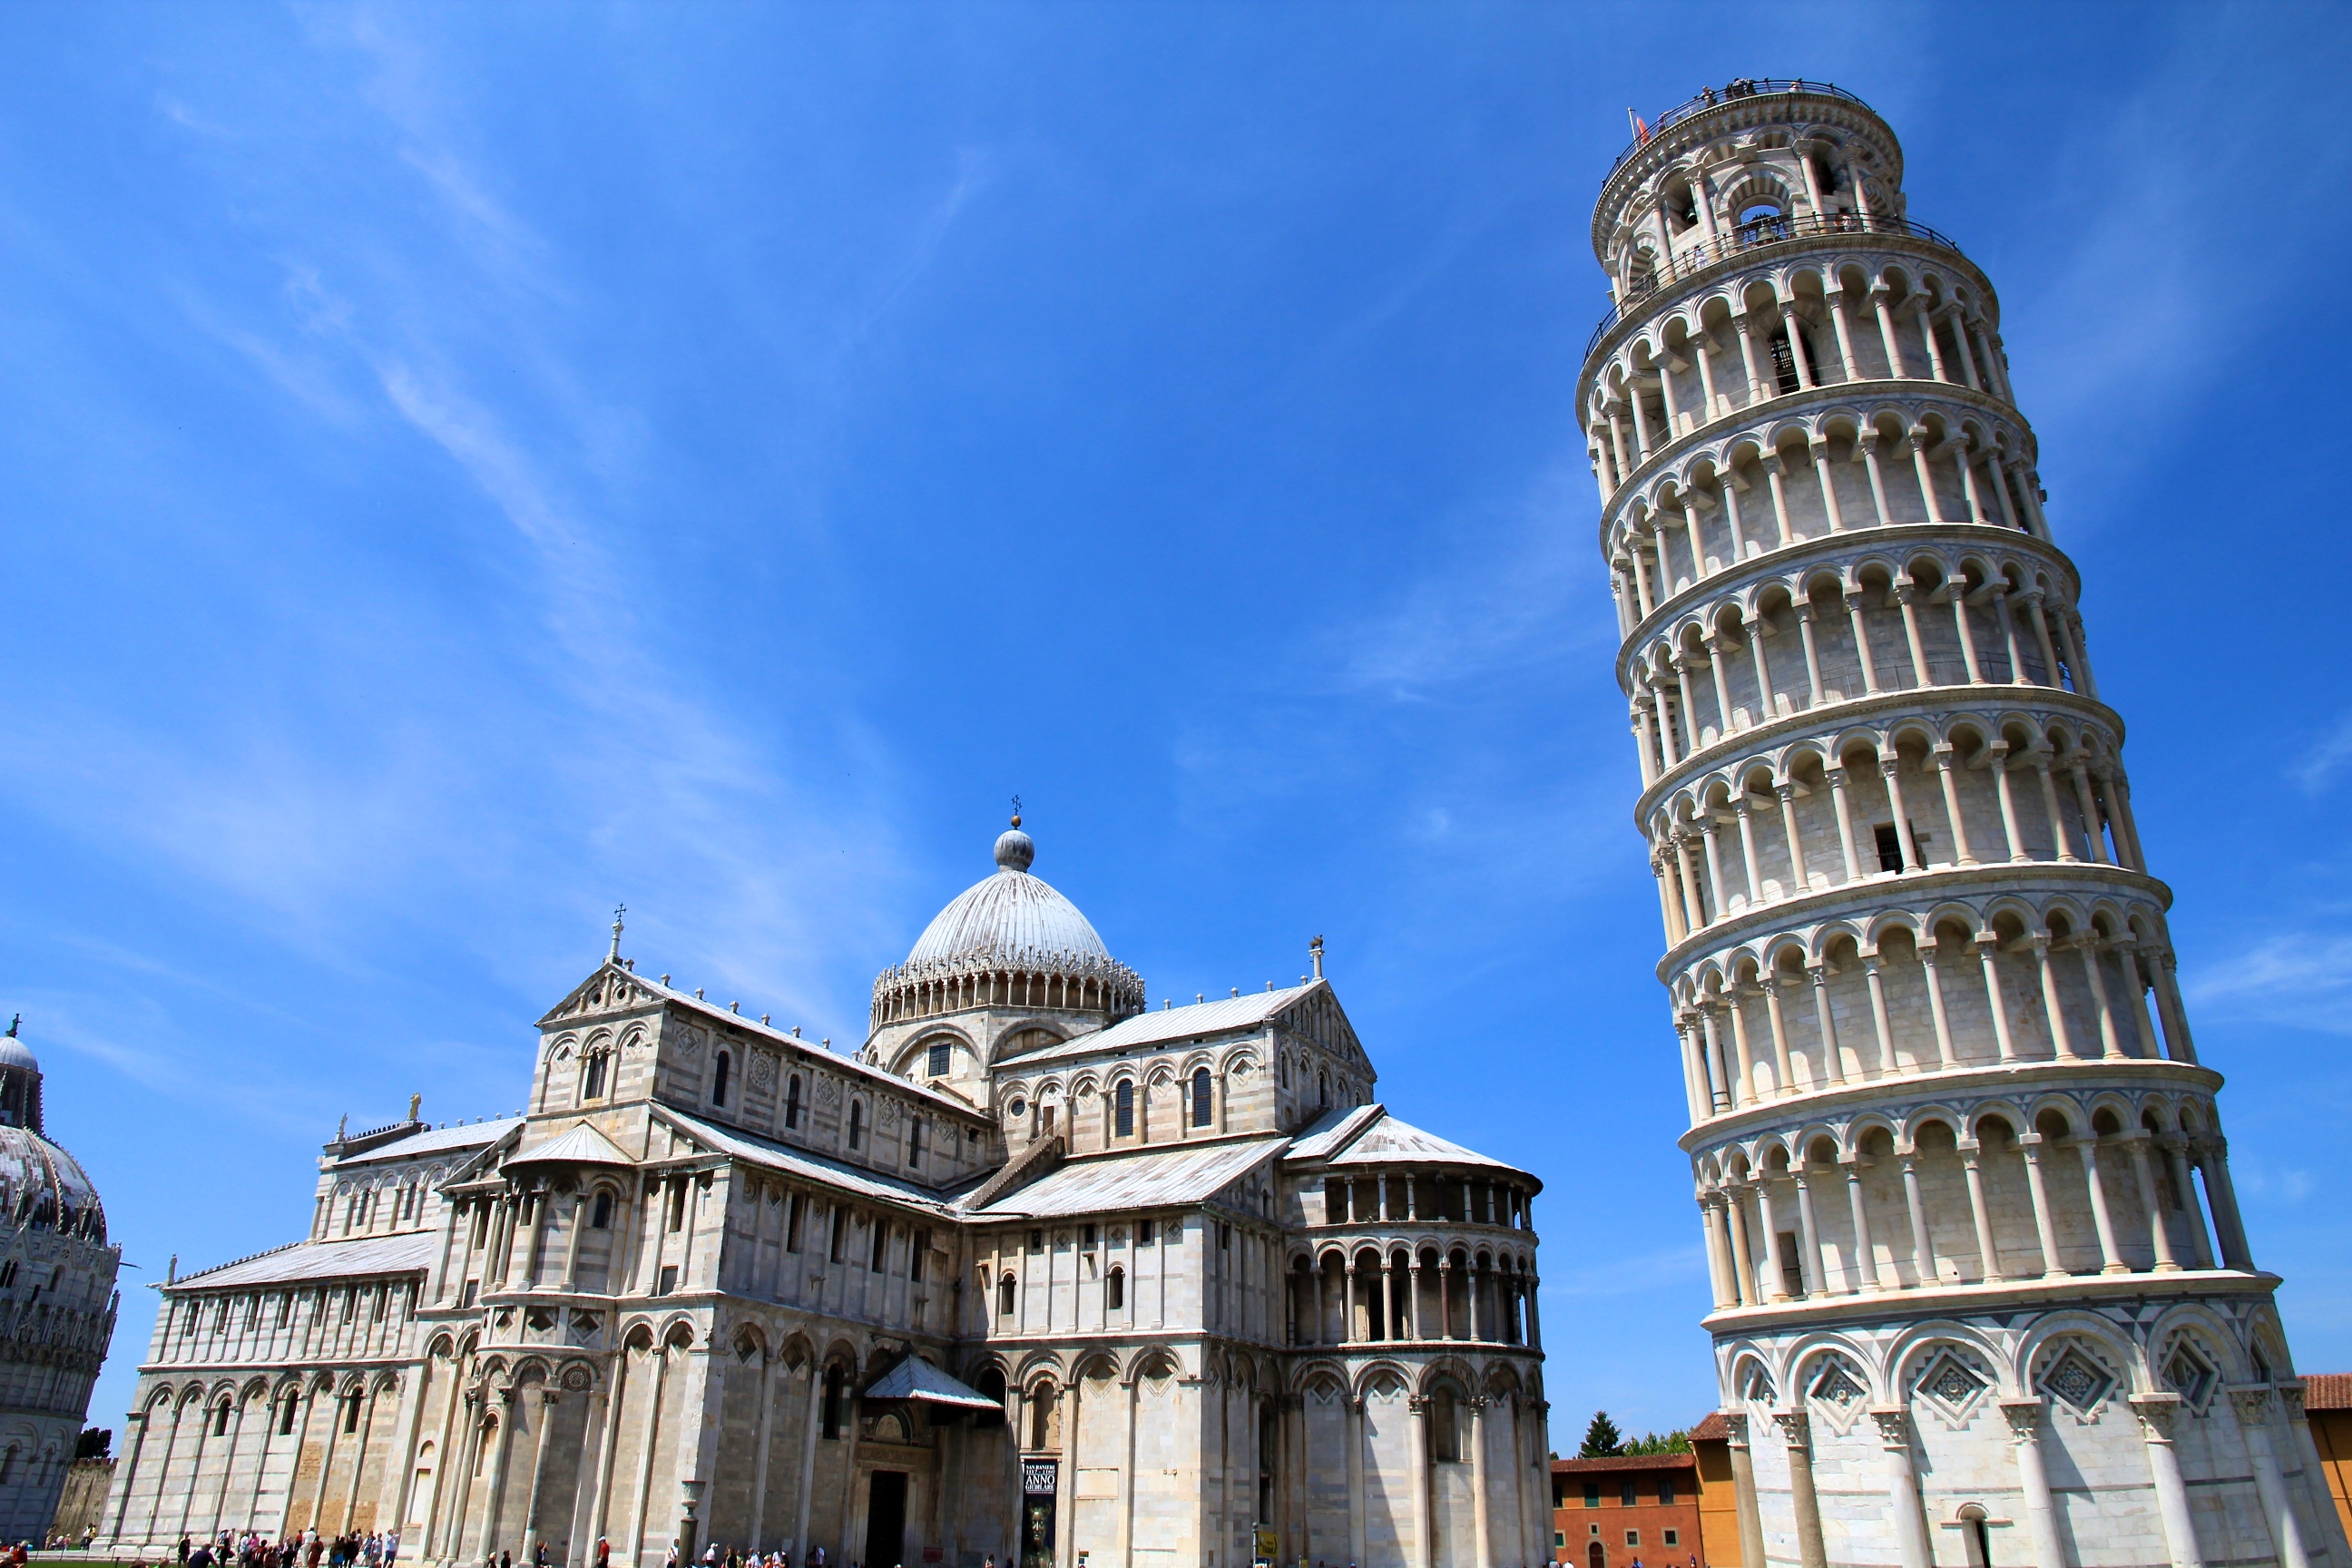 Leaning Tower of Pisa Travelling Moods